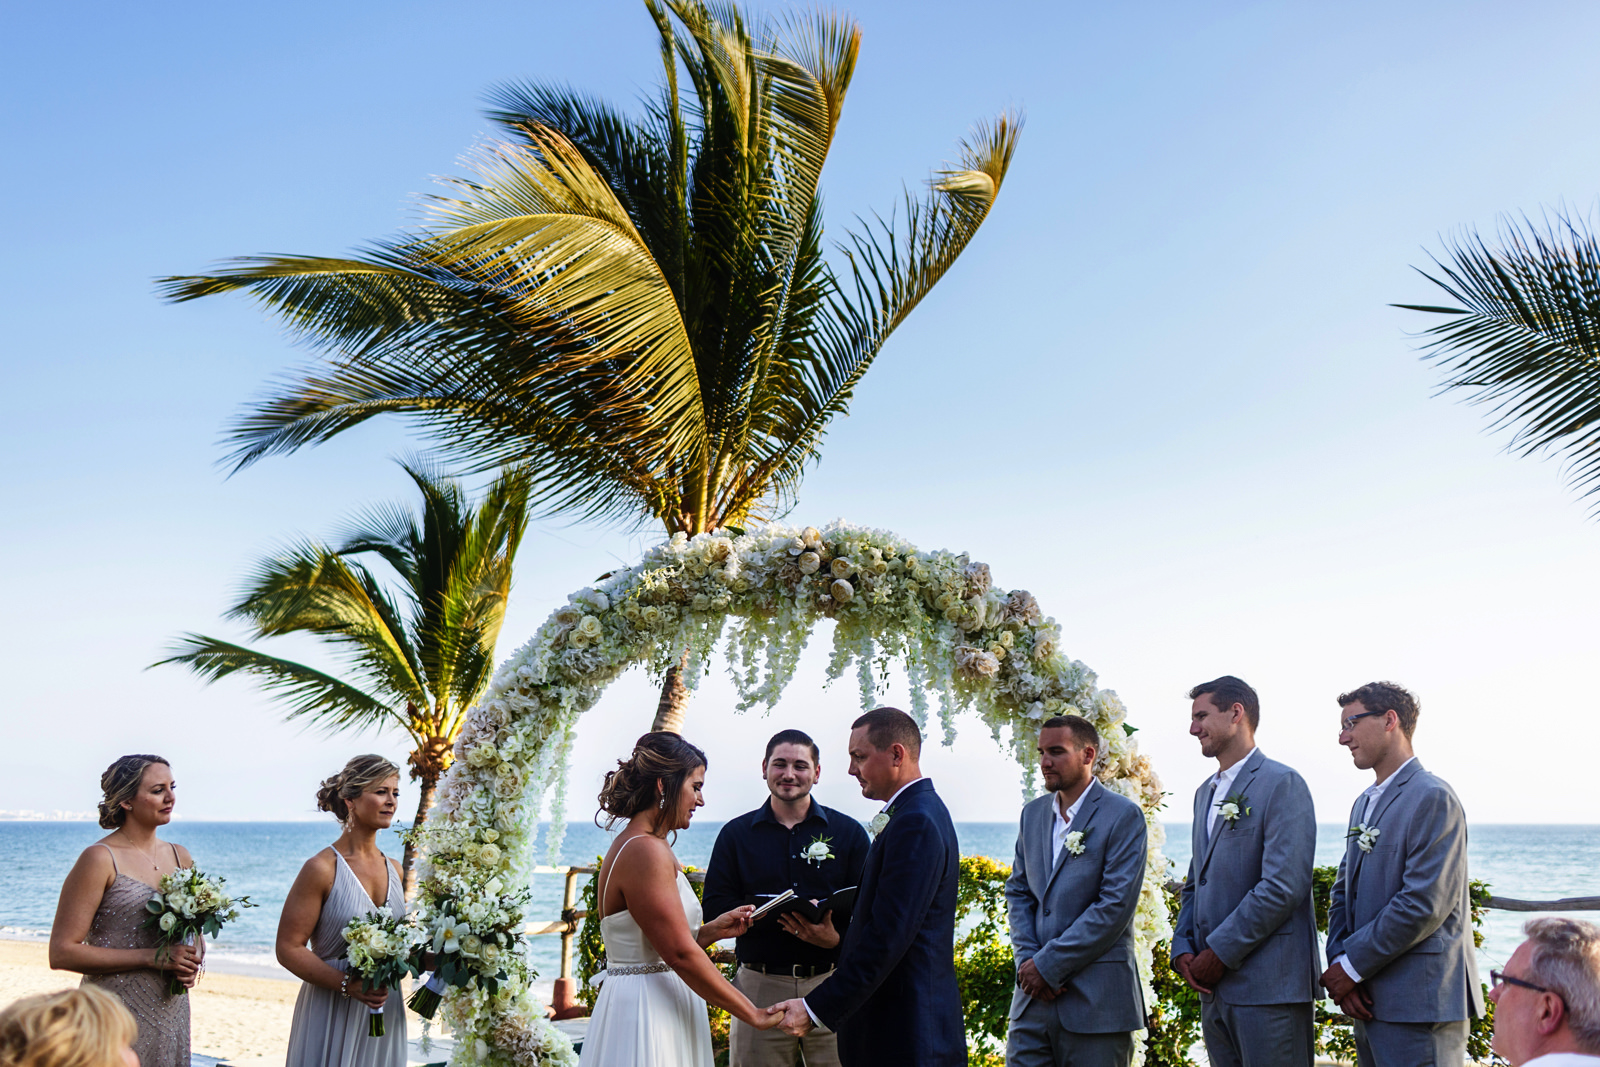 Bride reads her vows during the wedding ceremony with the ocean in the background